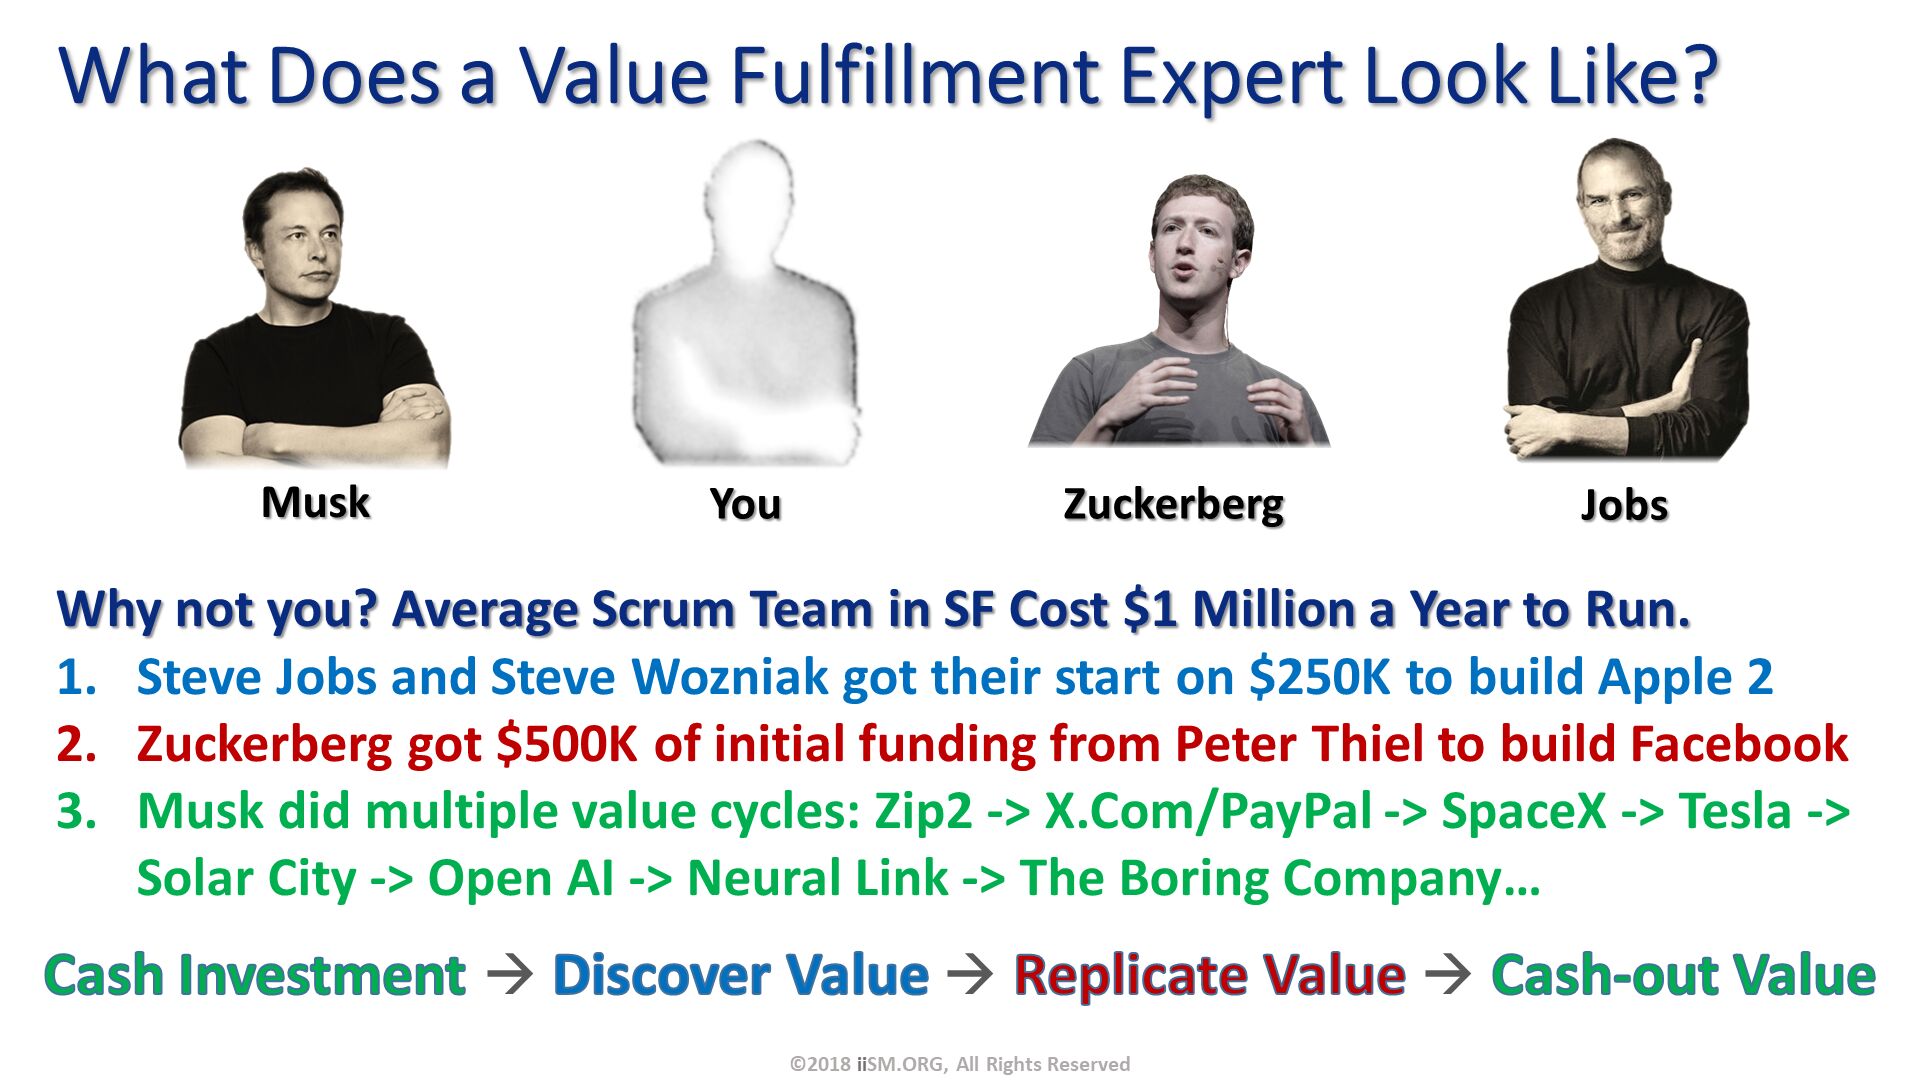 What Does a Value Fulfillment Expert Look Like?. ©2018 iiSM.ORG, All Rights Reserved. Cash Investment  Discover Value  Replicate Value  Cash-out Value. Musk. You. Zuckerberg. Jobs. Why not you? Average Scrum Team in SF Cost $1 Million a Year to Run.
Steve Jobs and Steve Wozniak got their start on $250K to build Apple 2
Zuckerberg got $500K of initial funding from Peter Thiel to build Facebook
Musk did multiple value cycles: Zip2 -> X.Com/PayPal -> SpaceX -> Tesla -> Solar City -> Open AI -> Neural Link -> The Boring Company…. 